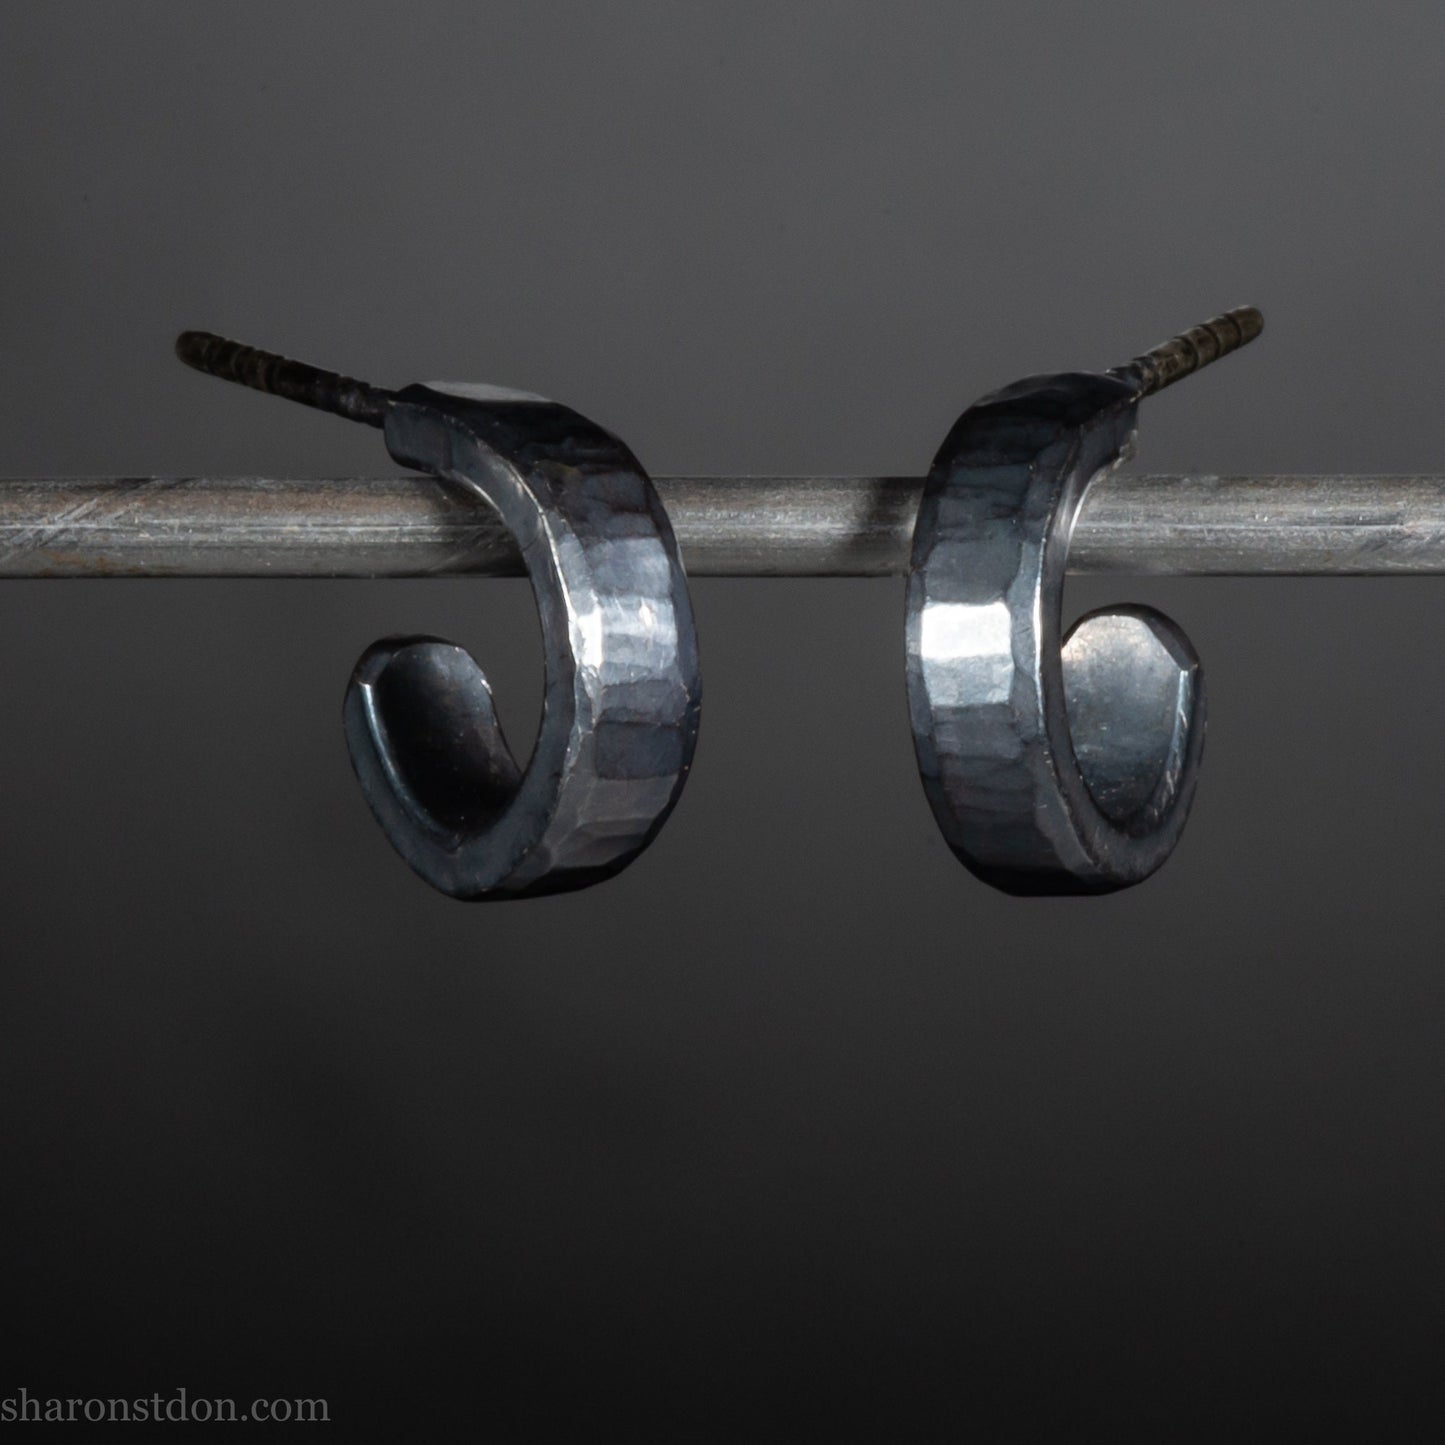 12mm x 3mm 925 sterling silver hoop earrings handmade in North America by Sharon SaintDon. Small, oxidized black with hammered texture.